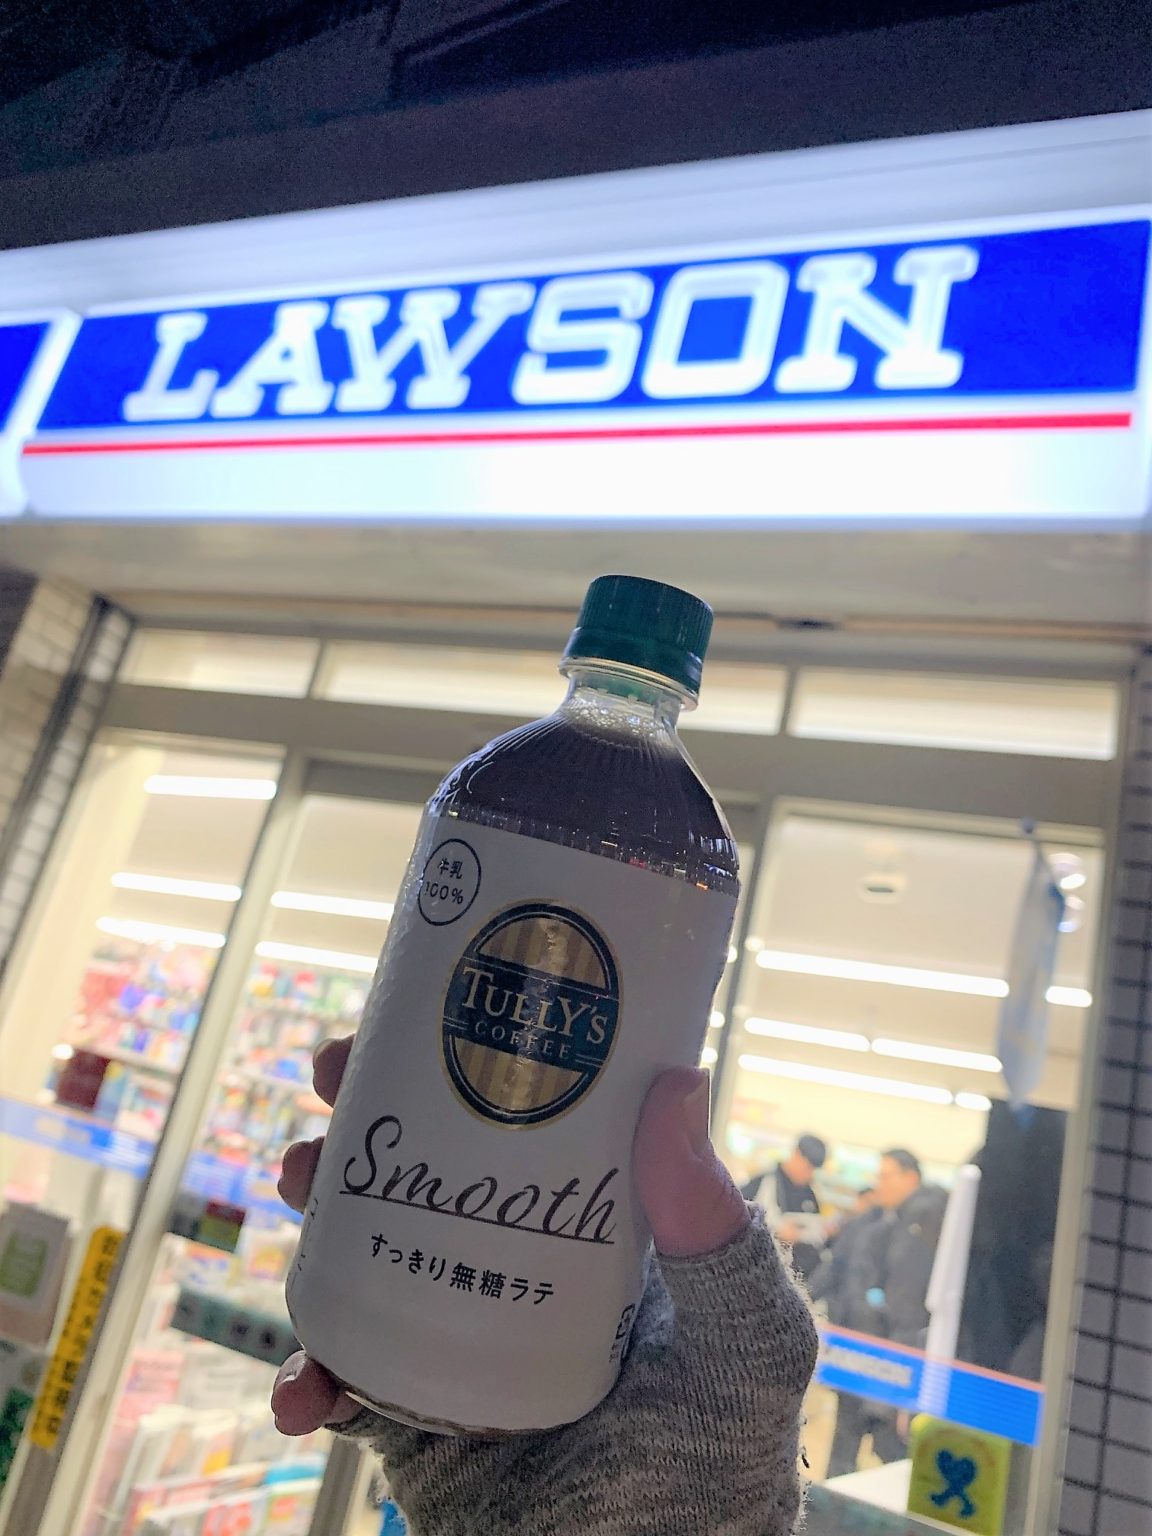 Getting a coffee from Lawson Convenience store in tokyo Japan